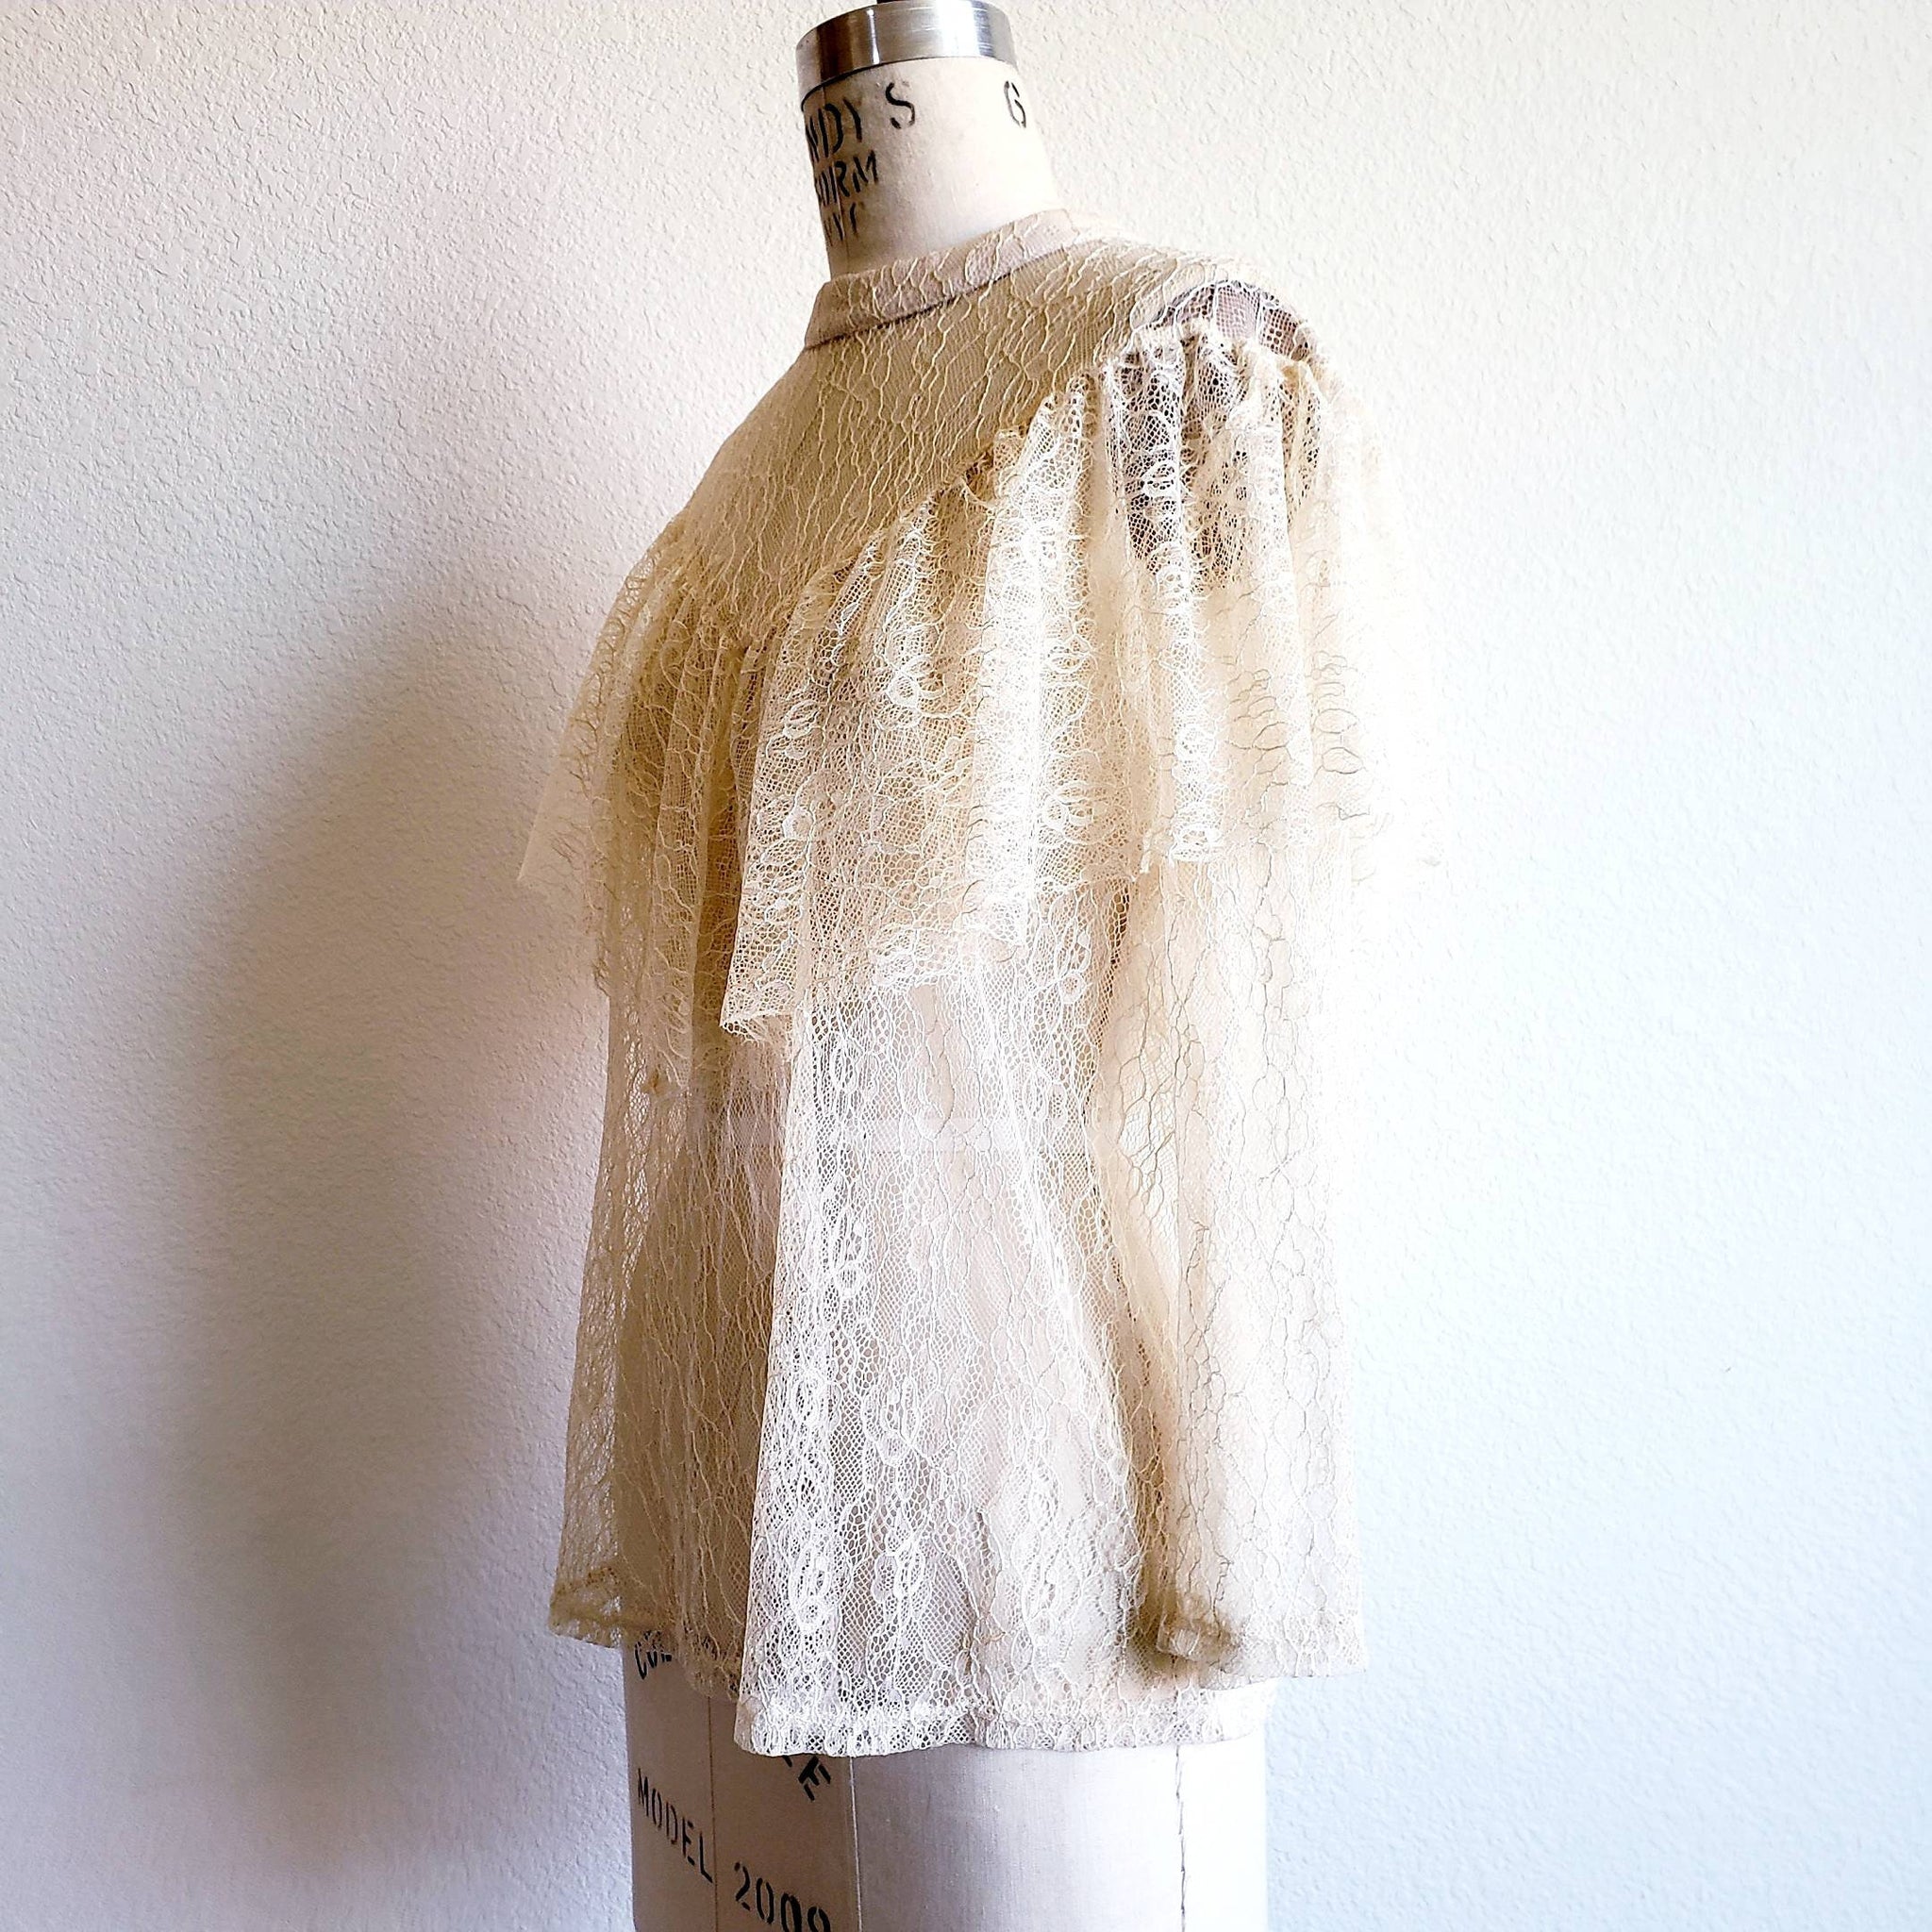 Vintage Lace Western Ruffle Blouse - ChicCityVintage